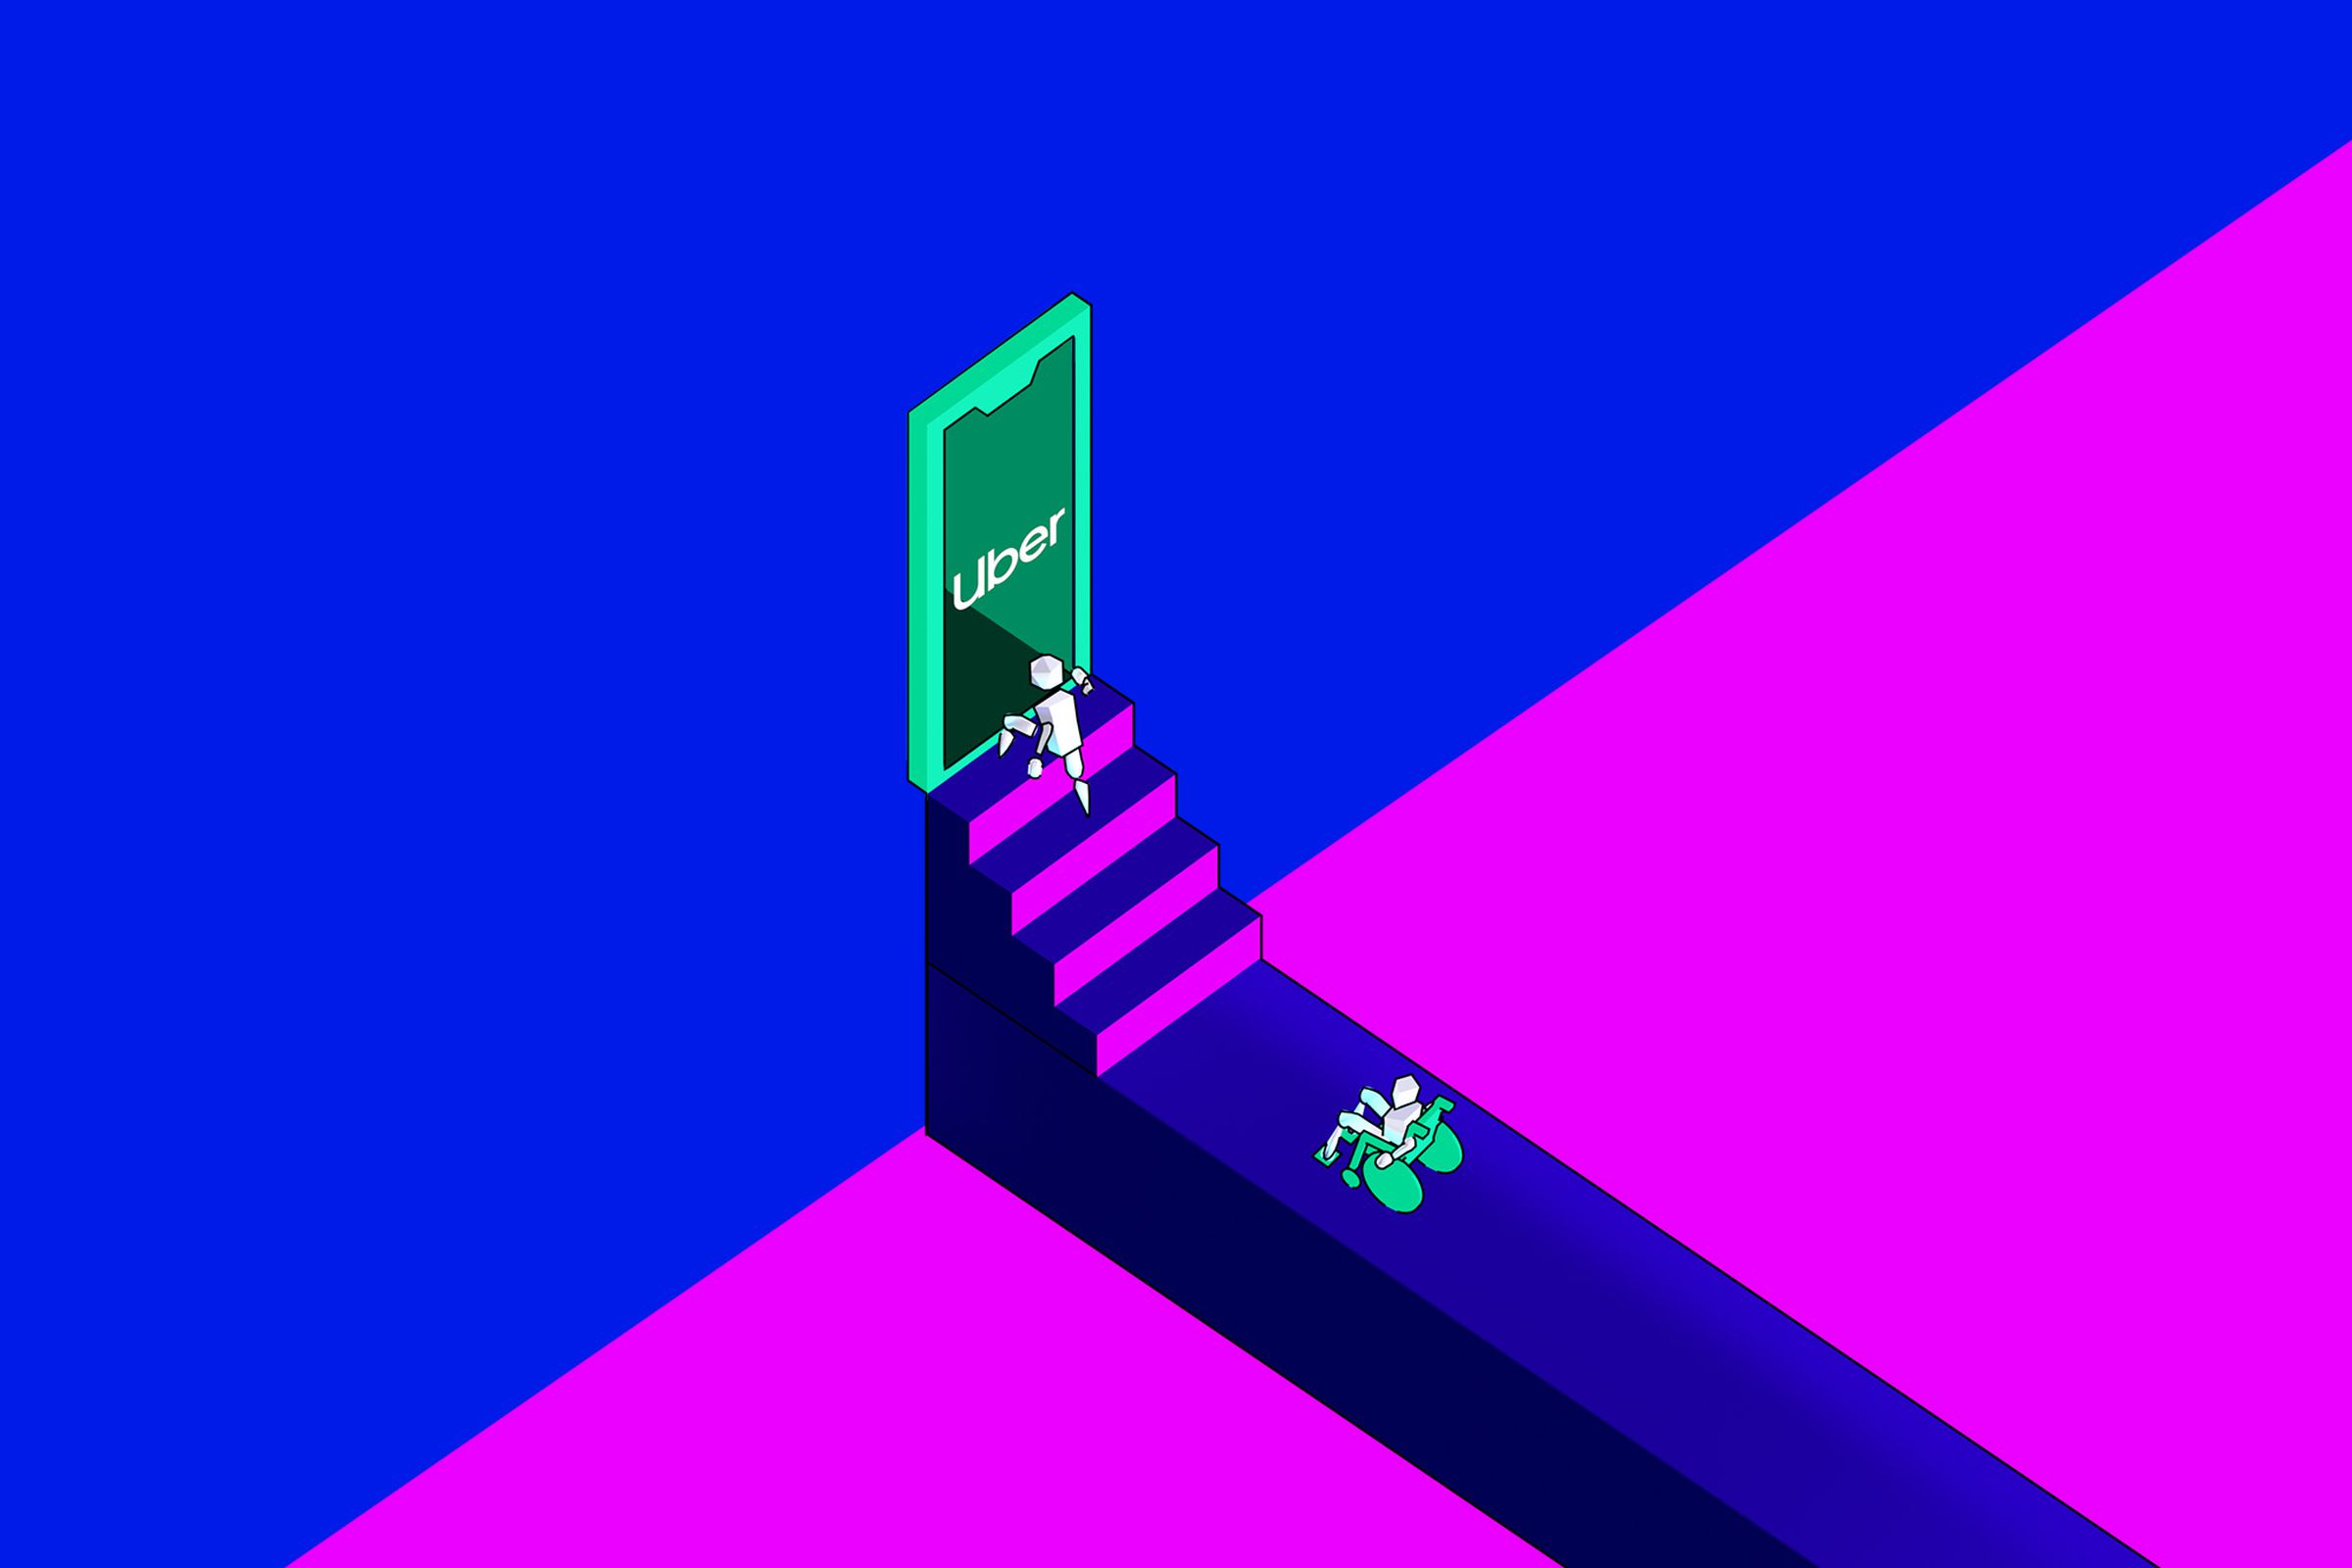 A character in a wheelchair watches from below as another character climbs stairs and walks through an opening in a wall labeled “Uber.” The opening is in the shape of a smartphone.